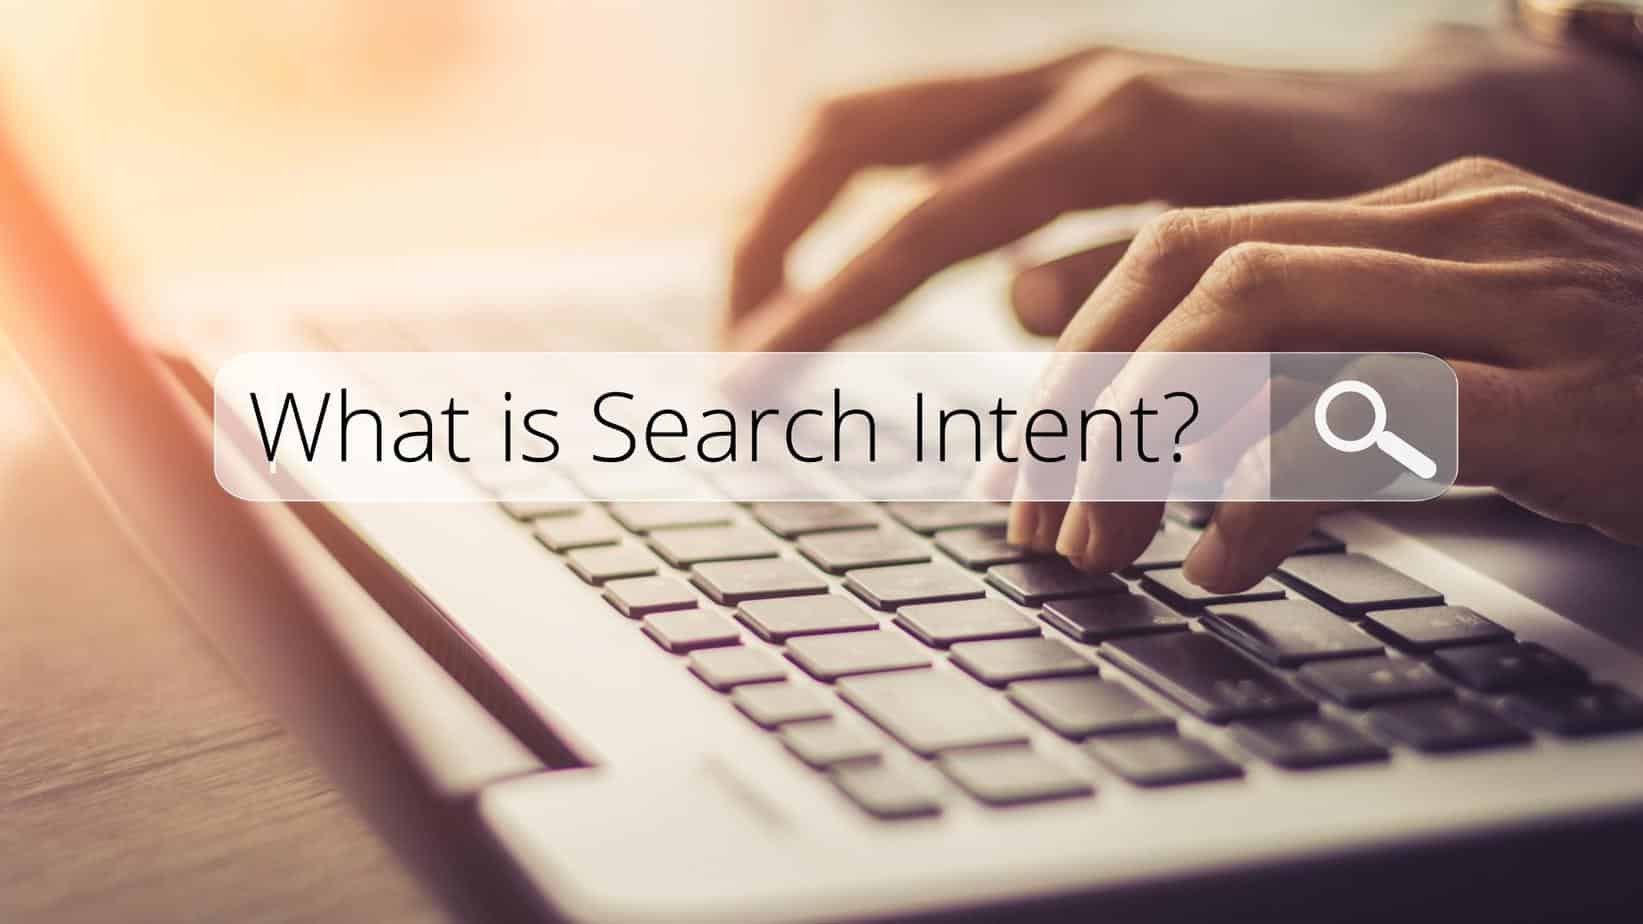 Featured image for “What is Search Intent?”